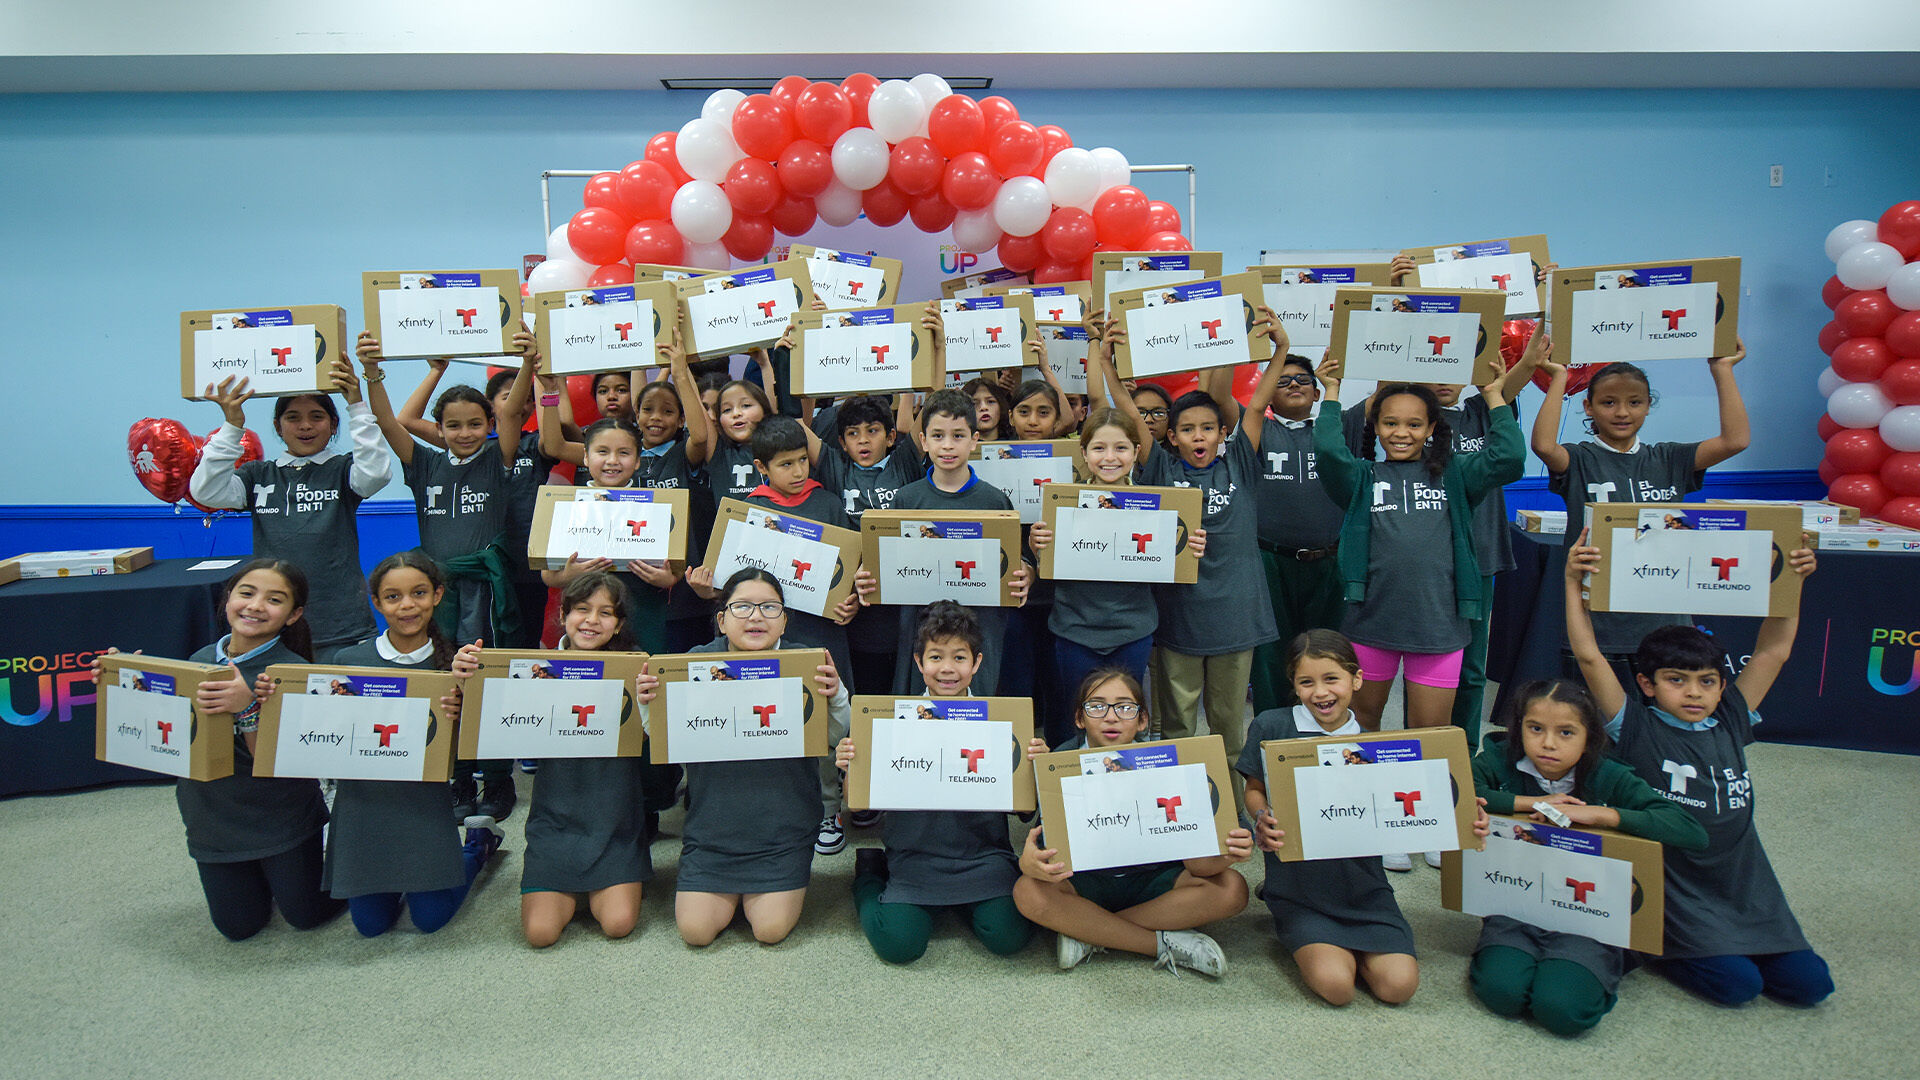 Comcast’s Project UP and NBCUniversal Telemundo Enterprises’ “El Poder En Ti” initiative have partnered with organizations across the country to donate thousands of laptops to Latino youth